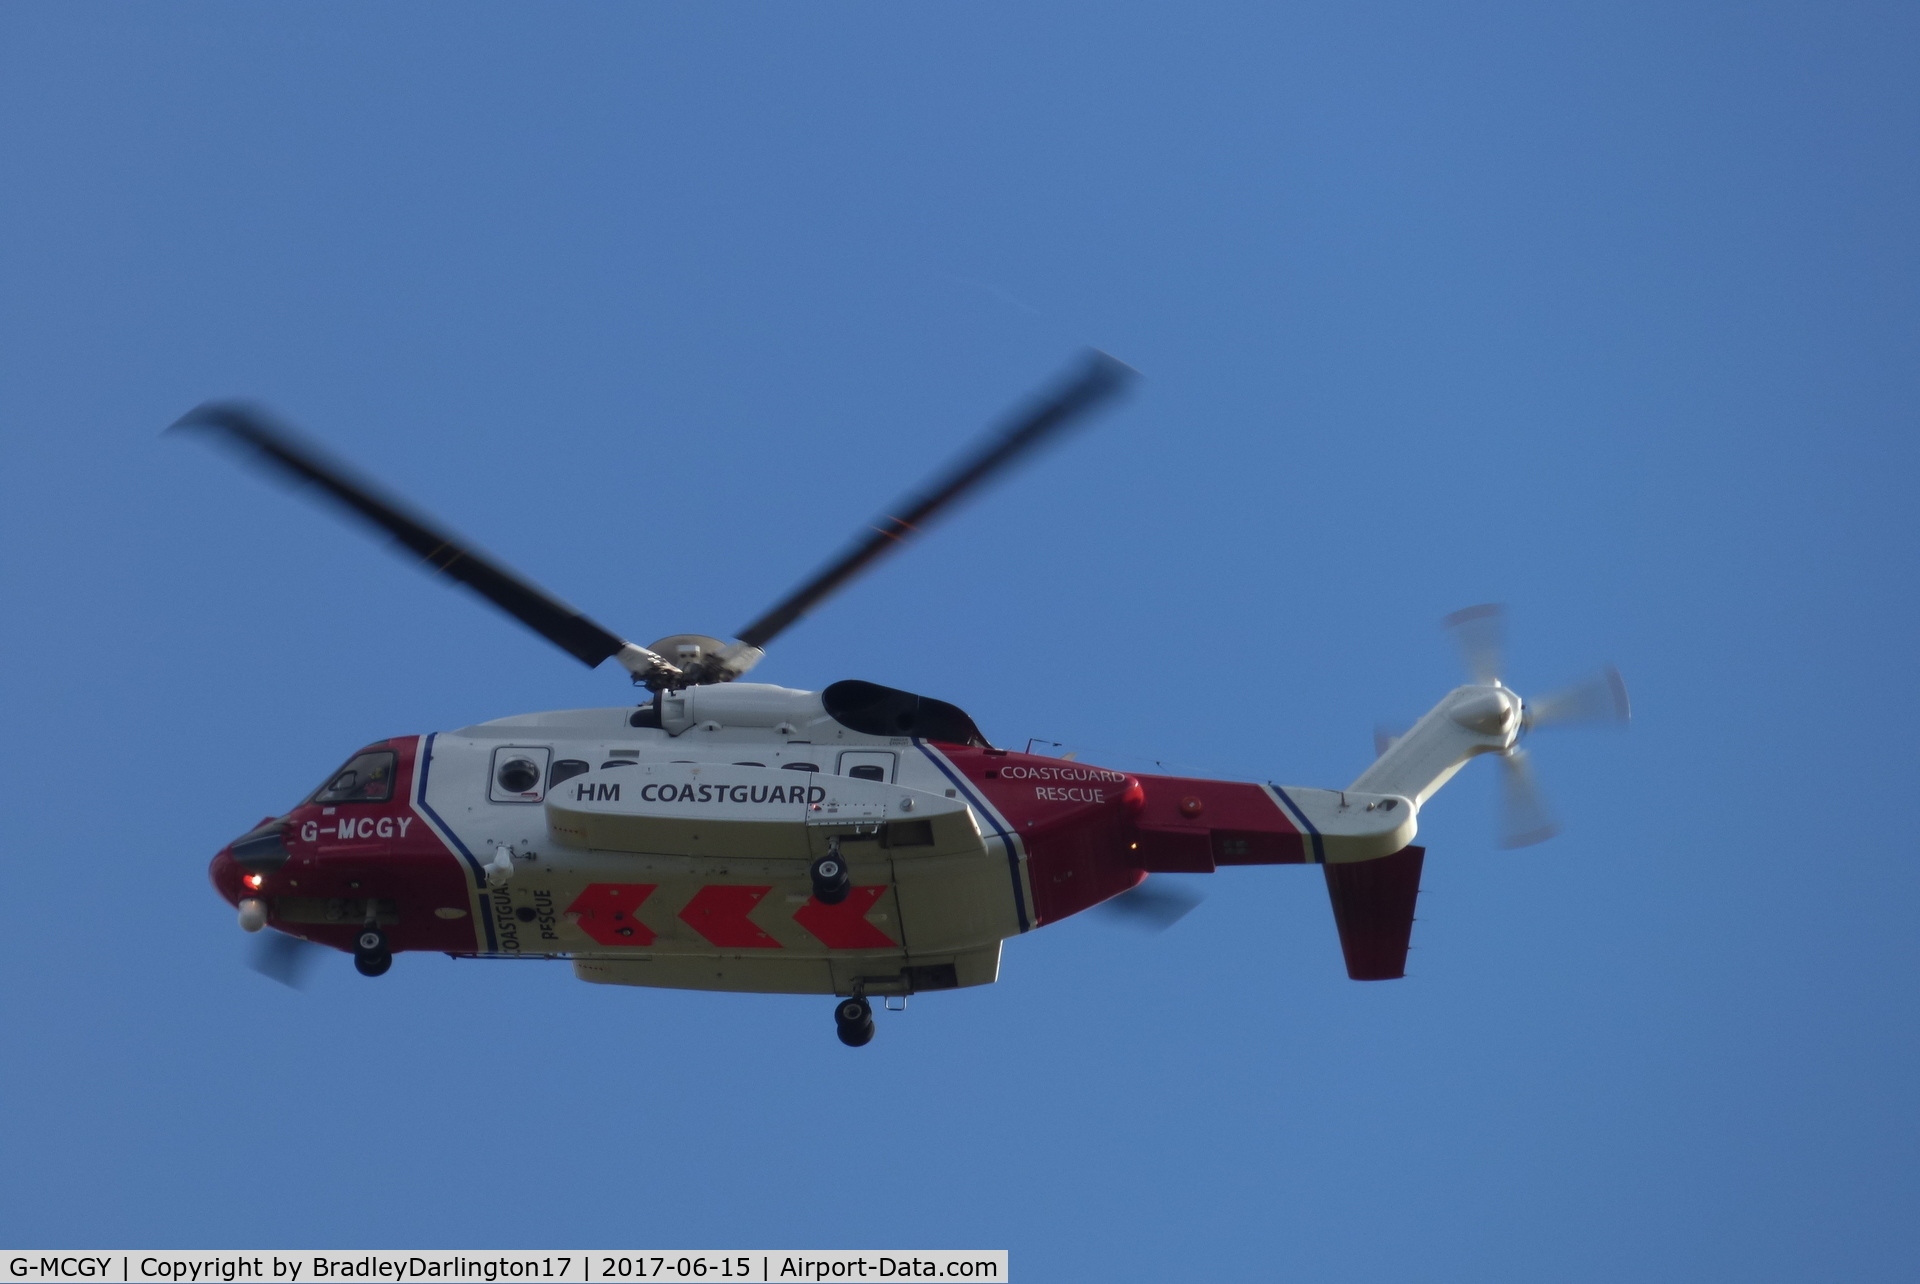 G-MCGY, 2014 Sikorsky S-92A C/N 920257, G-MCGY flying over plymouth to derriford